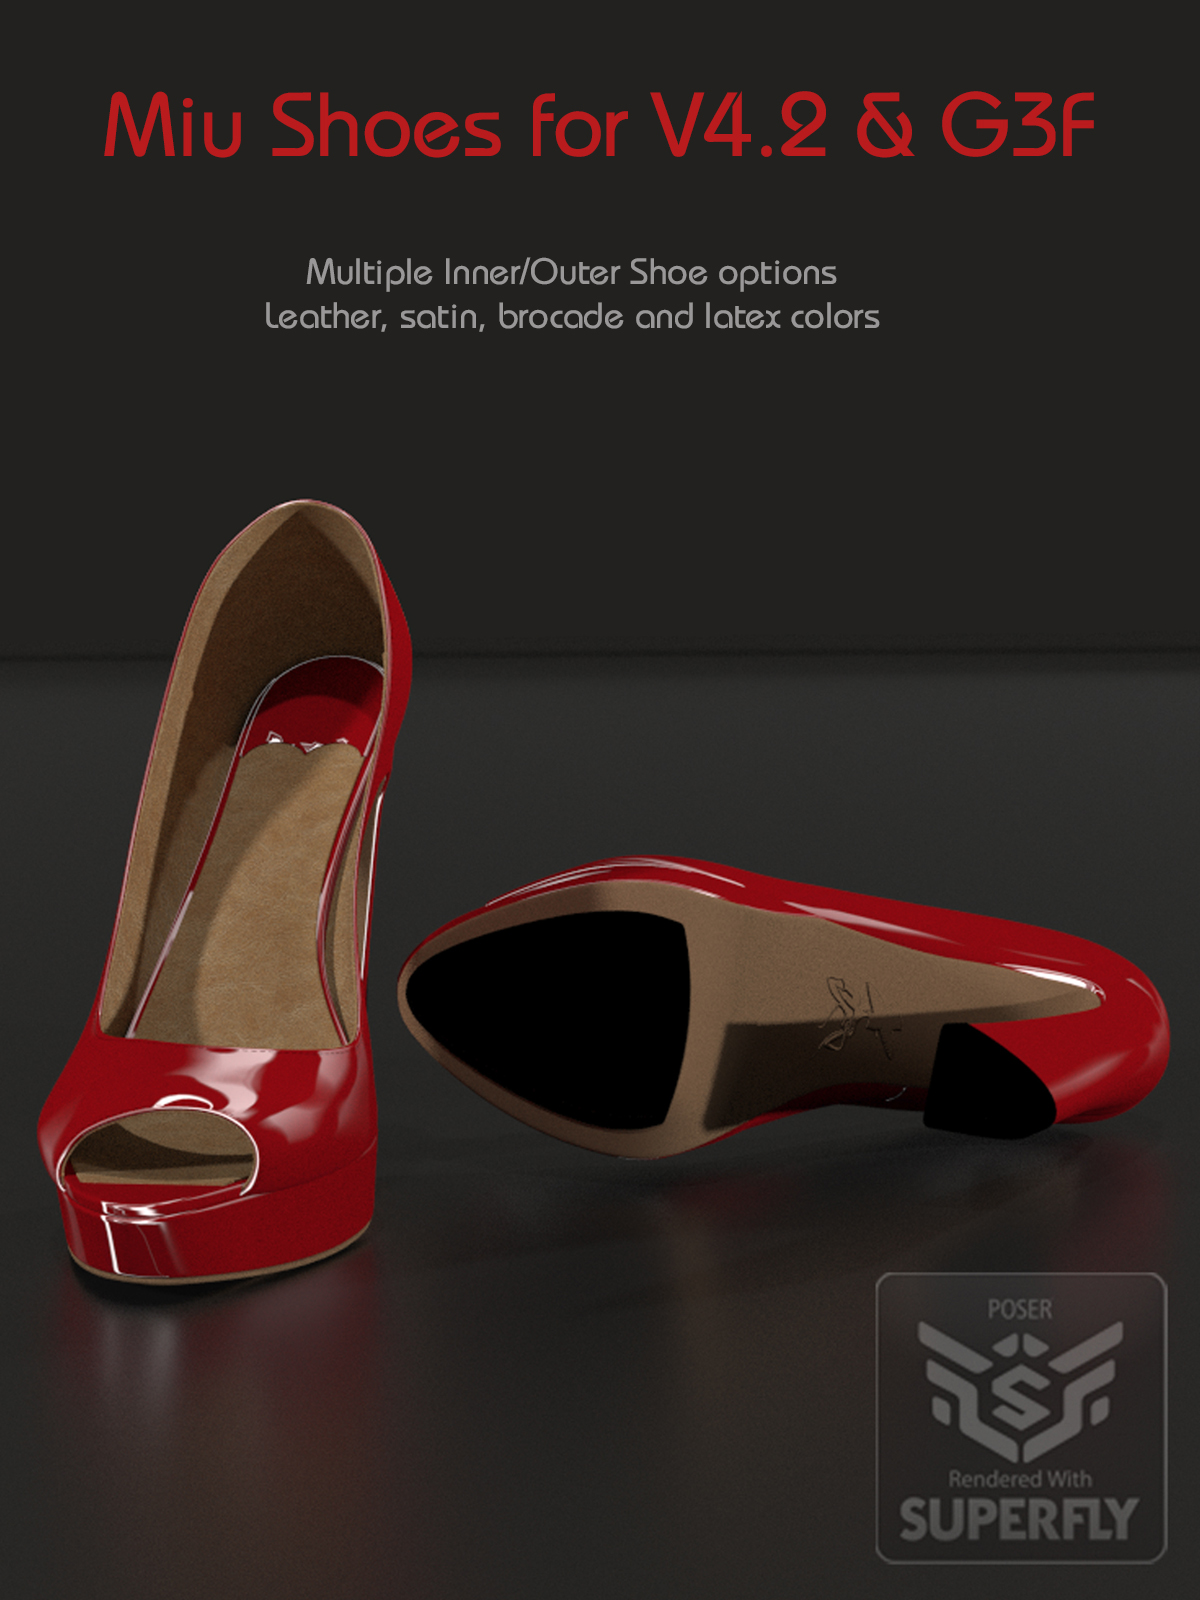 Miu Shoes for V4.2 and G3F